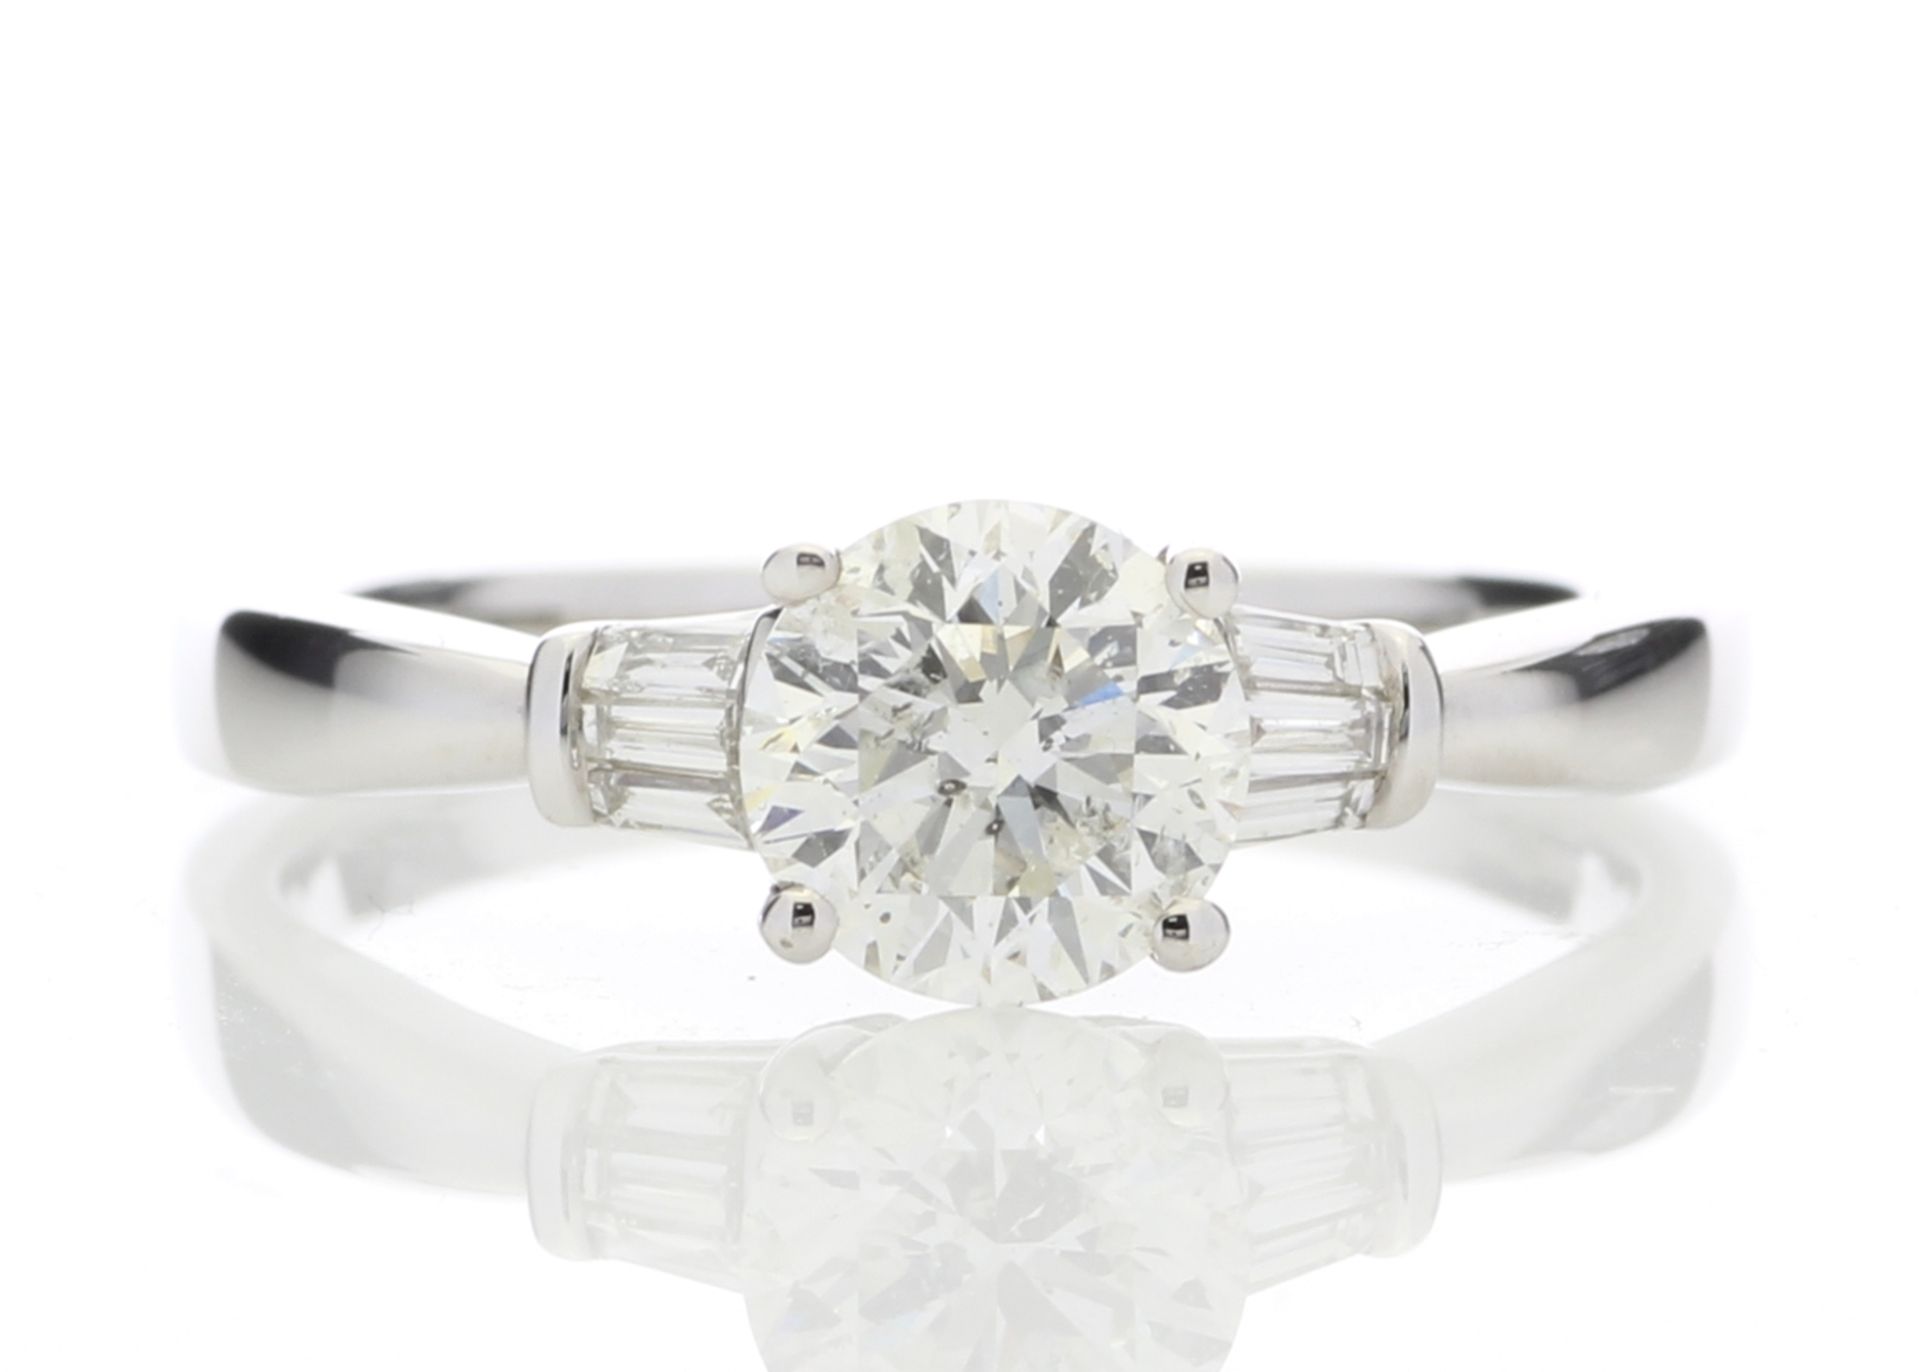 18ct White Gold Single Stone Diamond Ring With Baguette (1.02) 1.15 Carats - Valued by GIE £37,300.